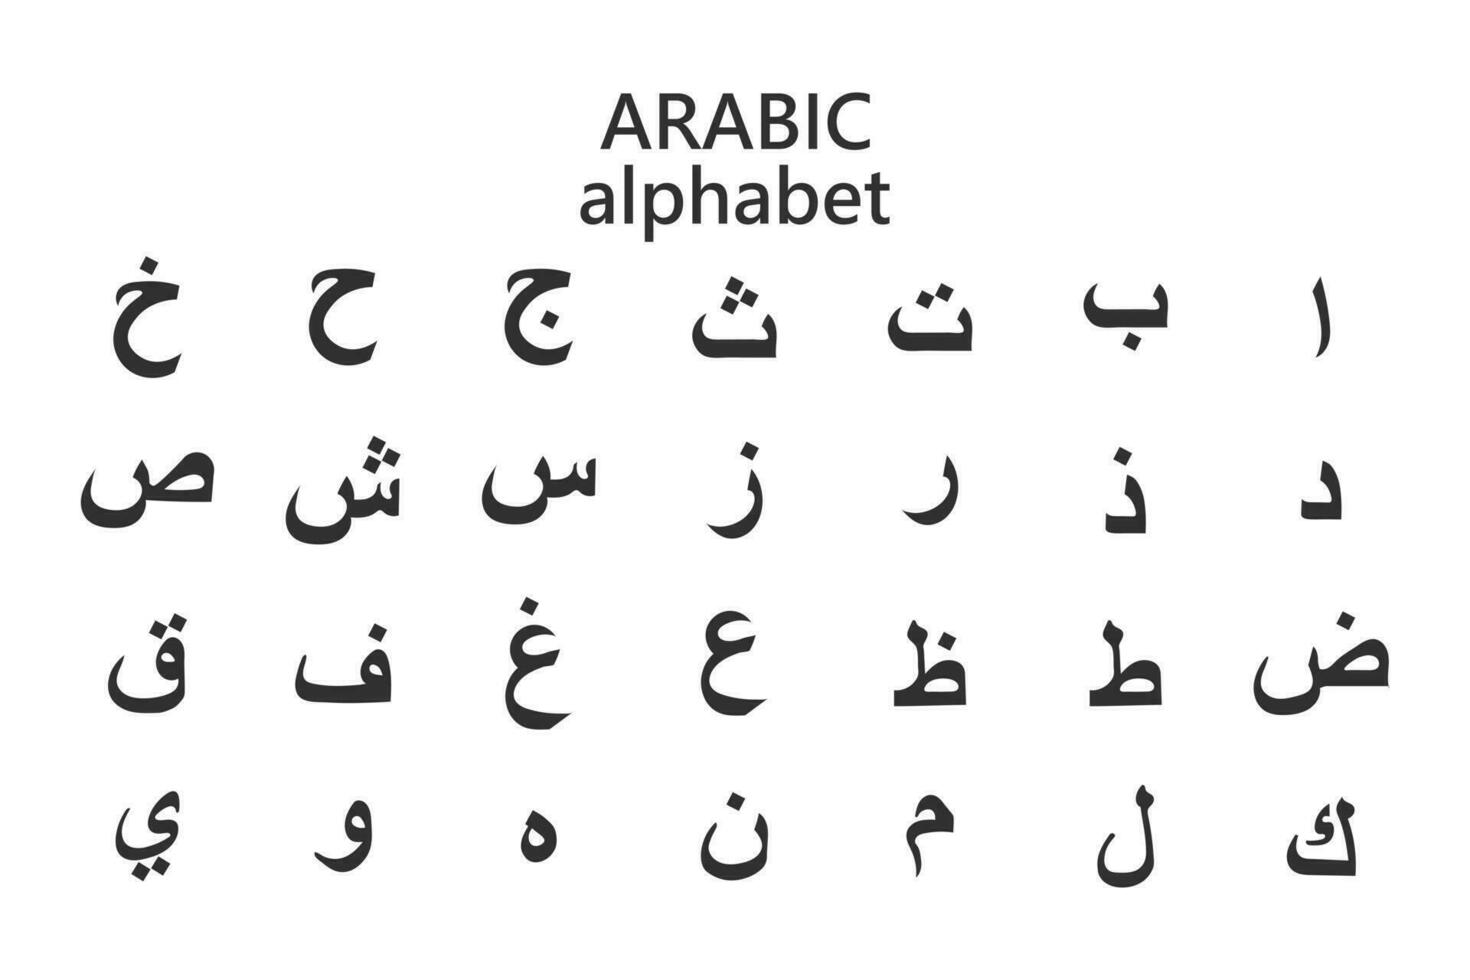 Letters of the Arabic alphabet on a white background. Illustration, vector